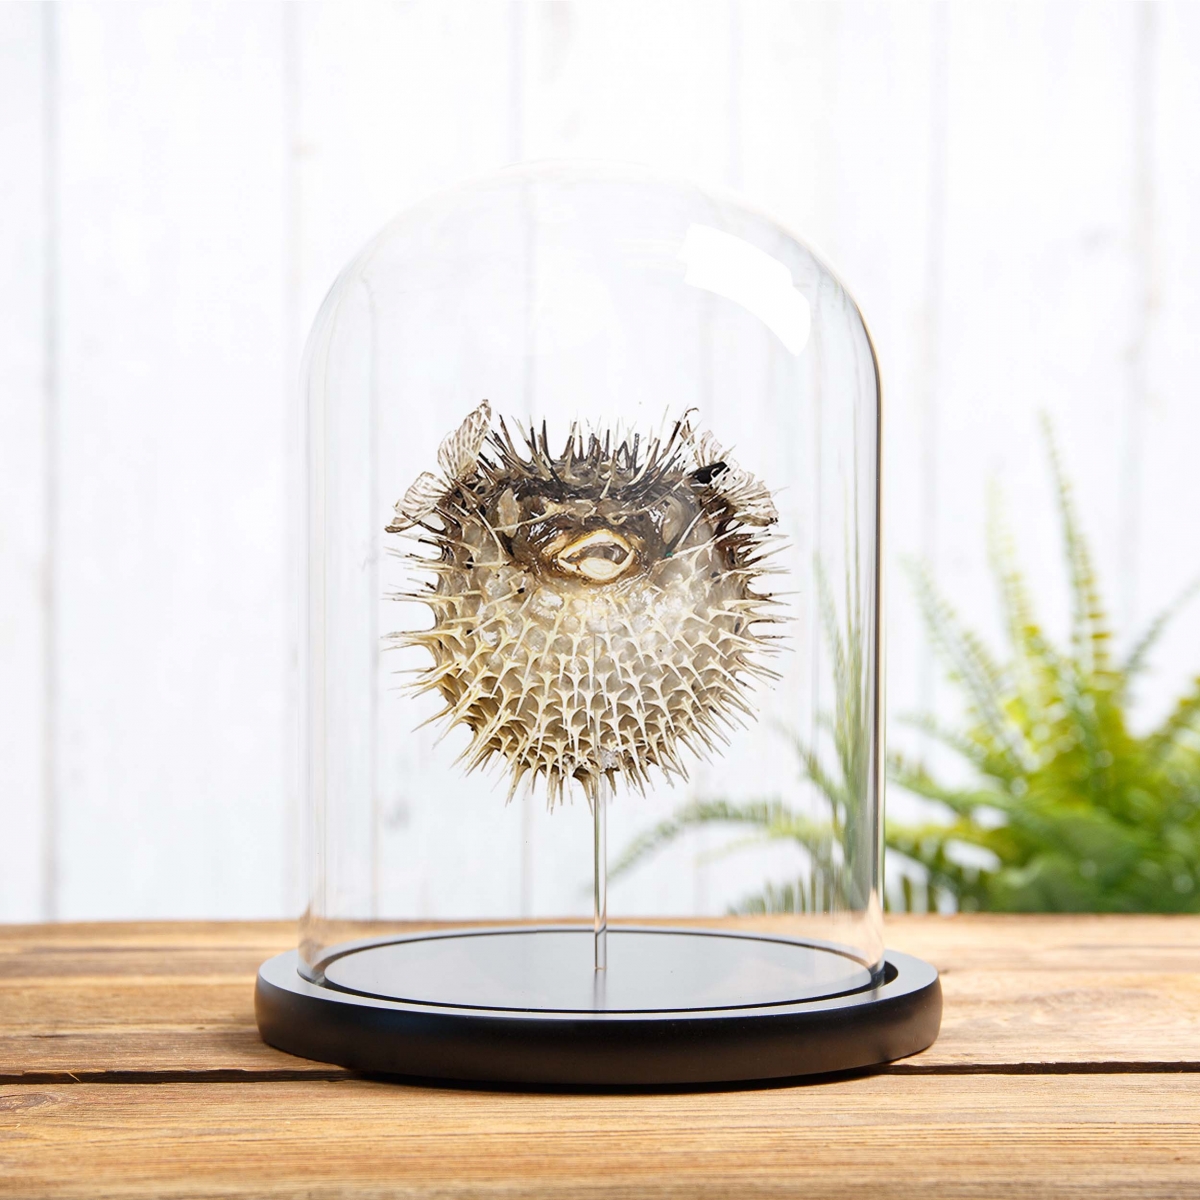 Minibeast Puffer Fish in Glass Dome with Wooden Base (Tetraodontidae)